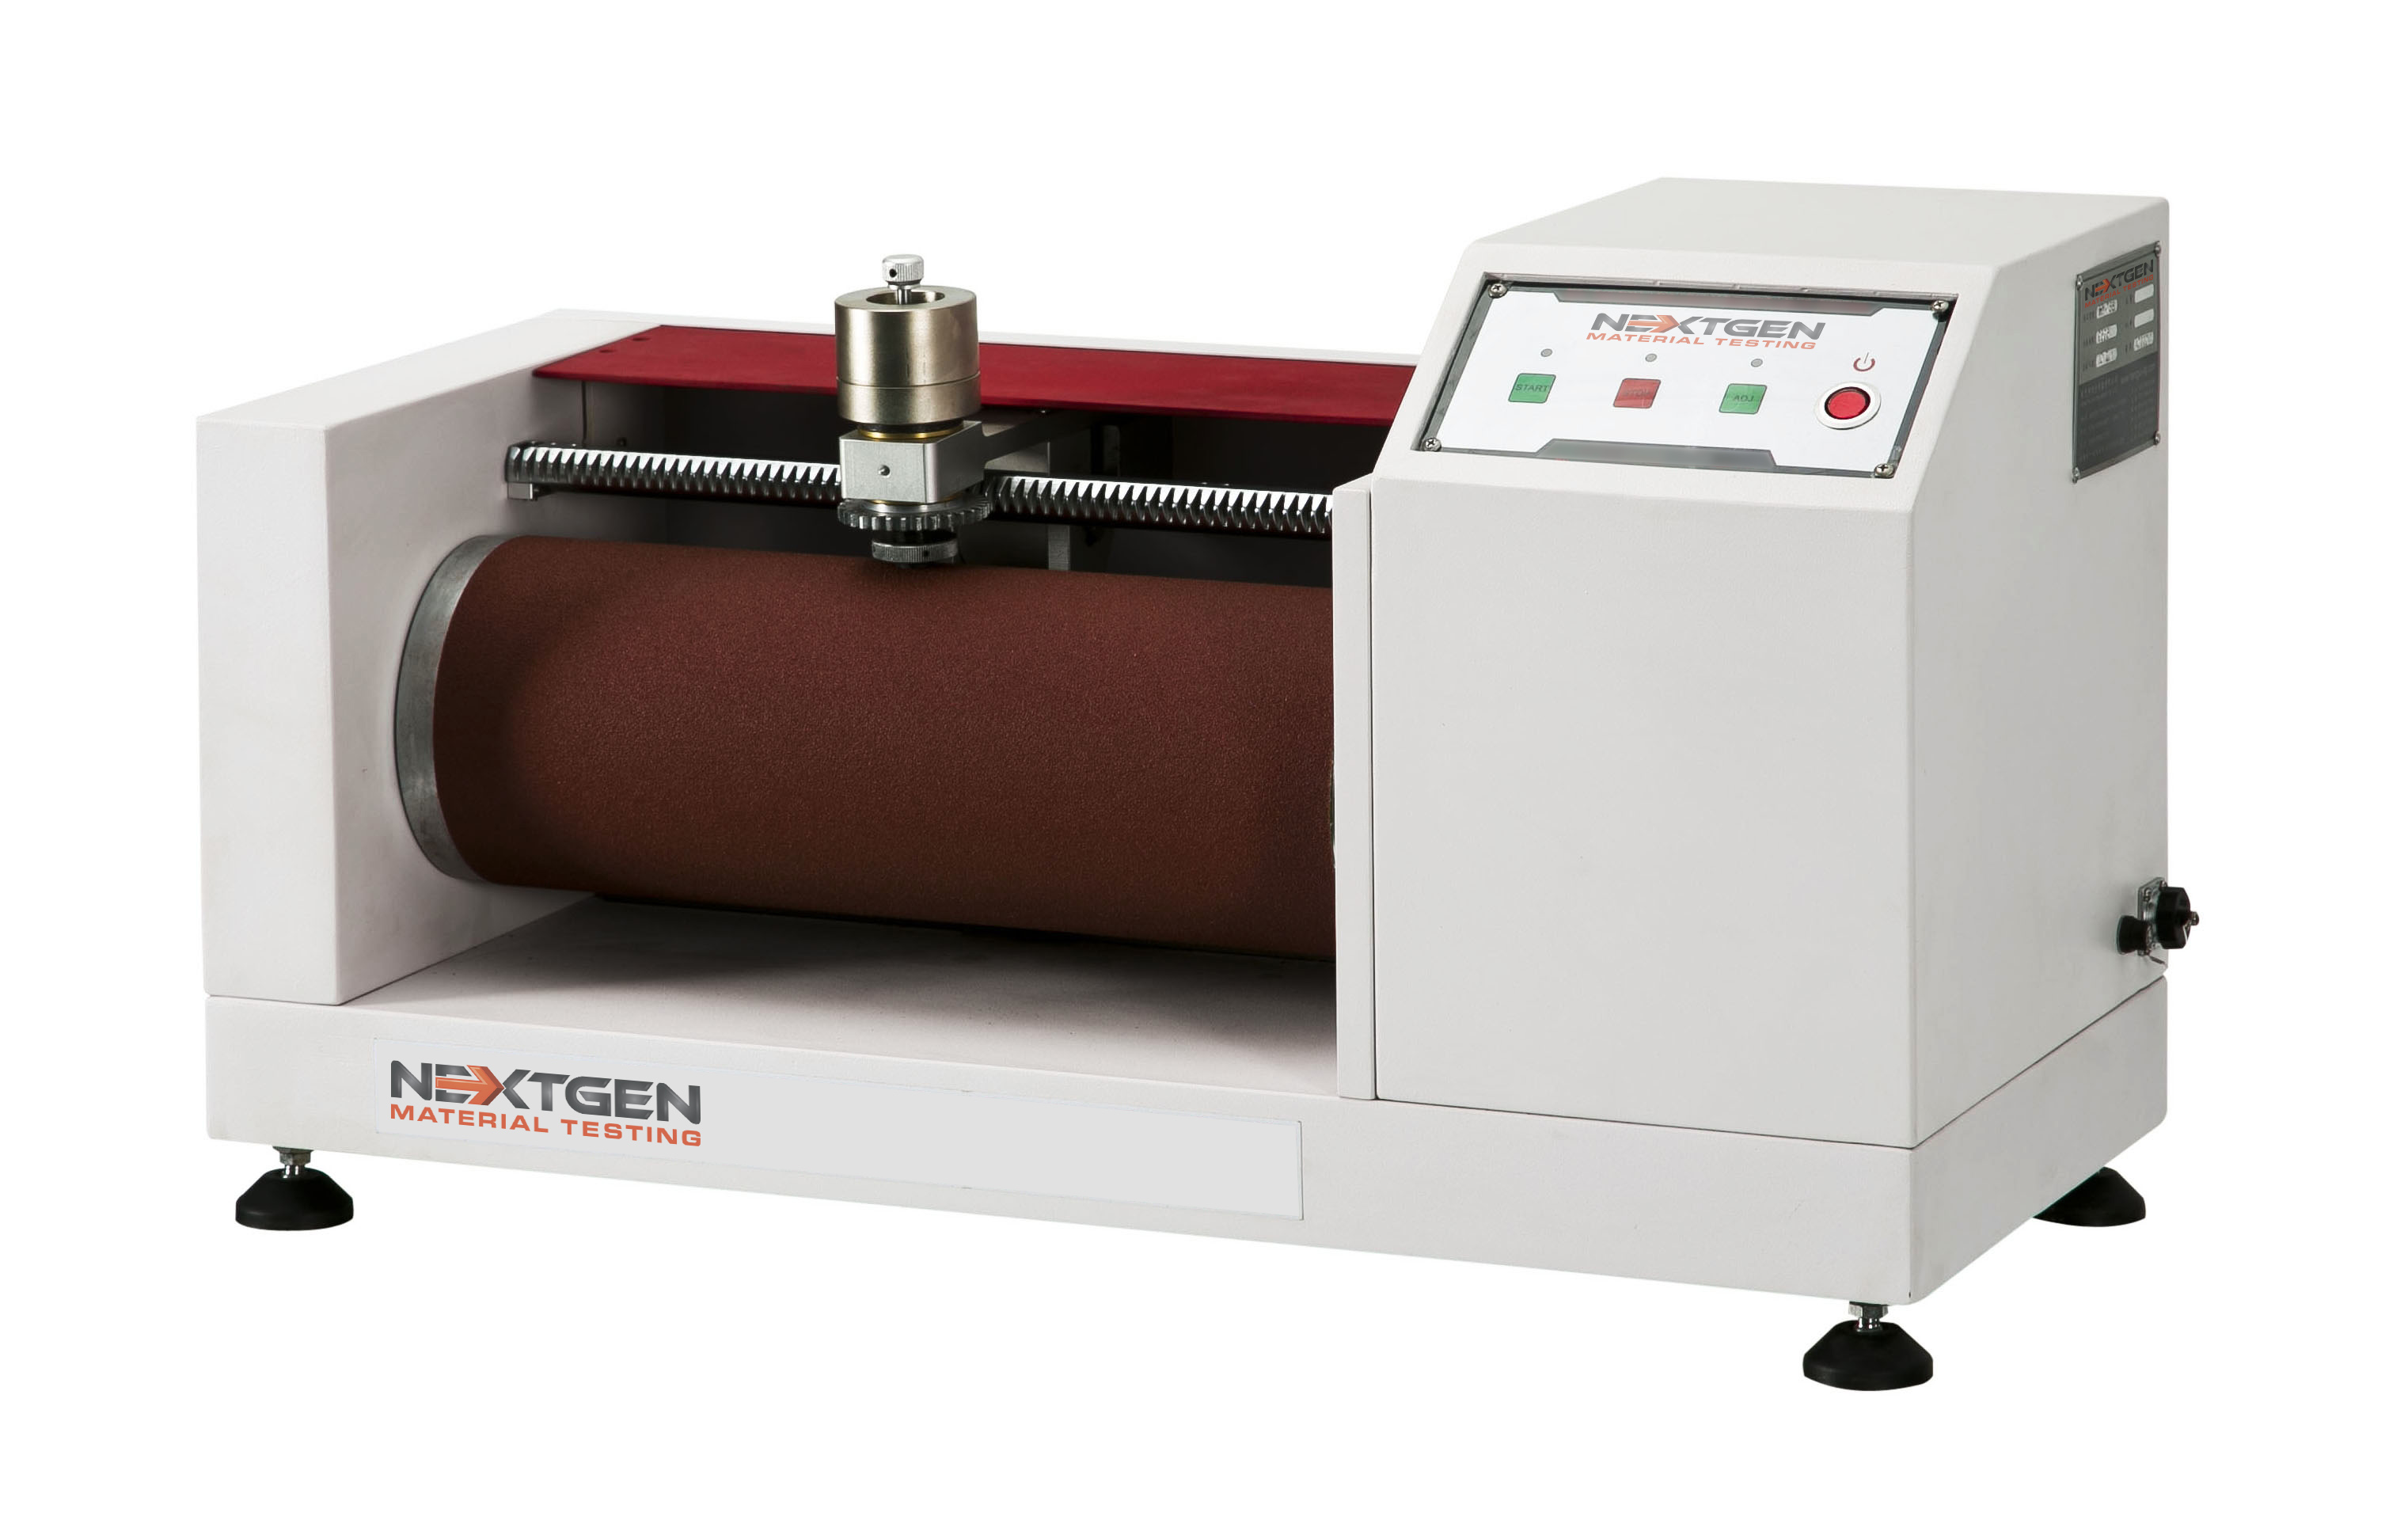 DIN Abrasion Testing System to Determine Material Wear Resistance